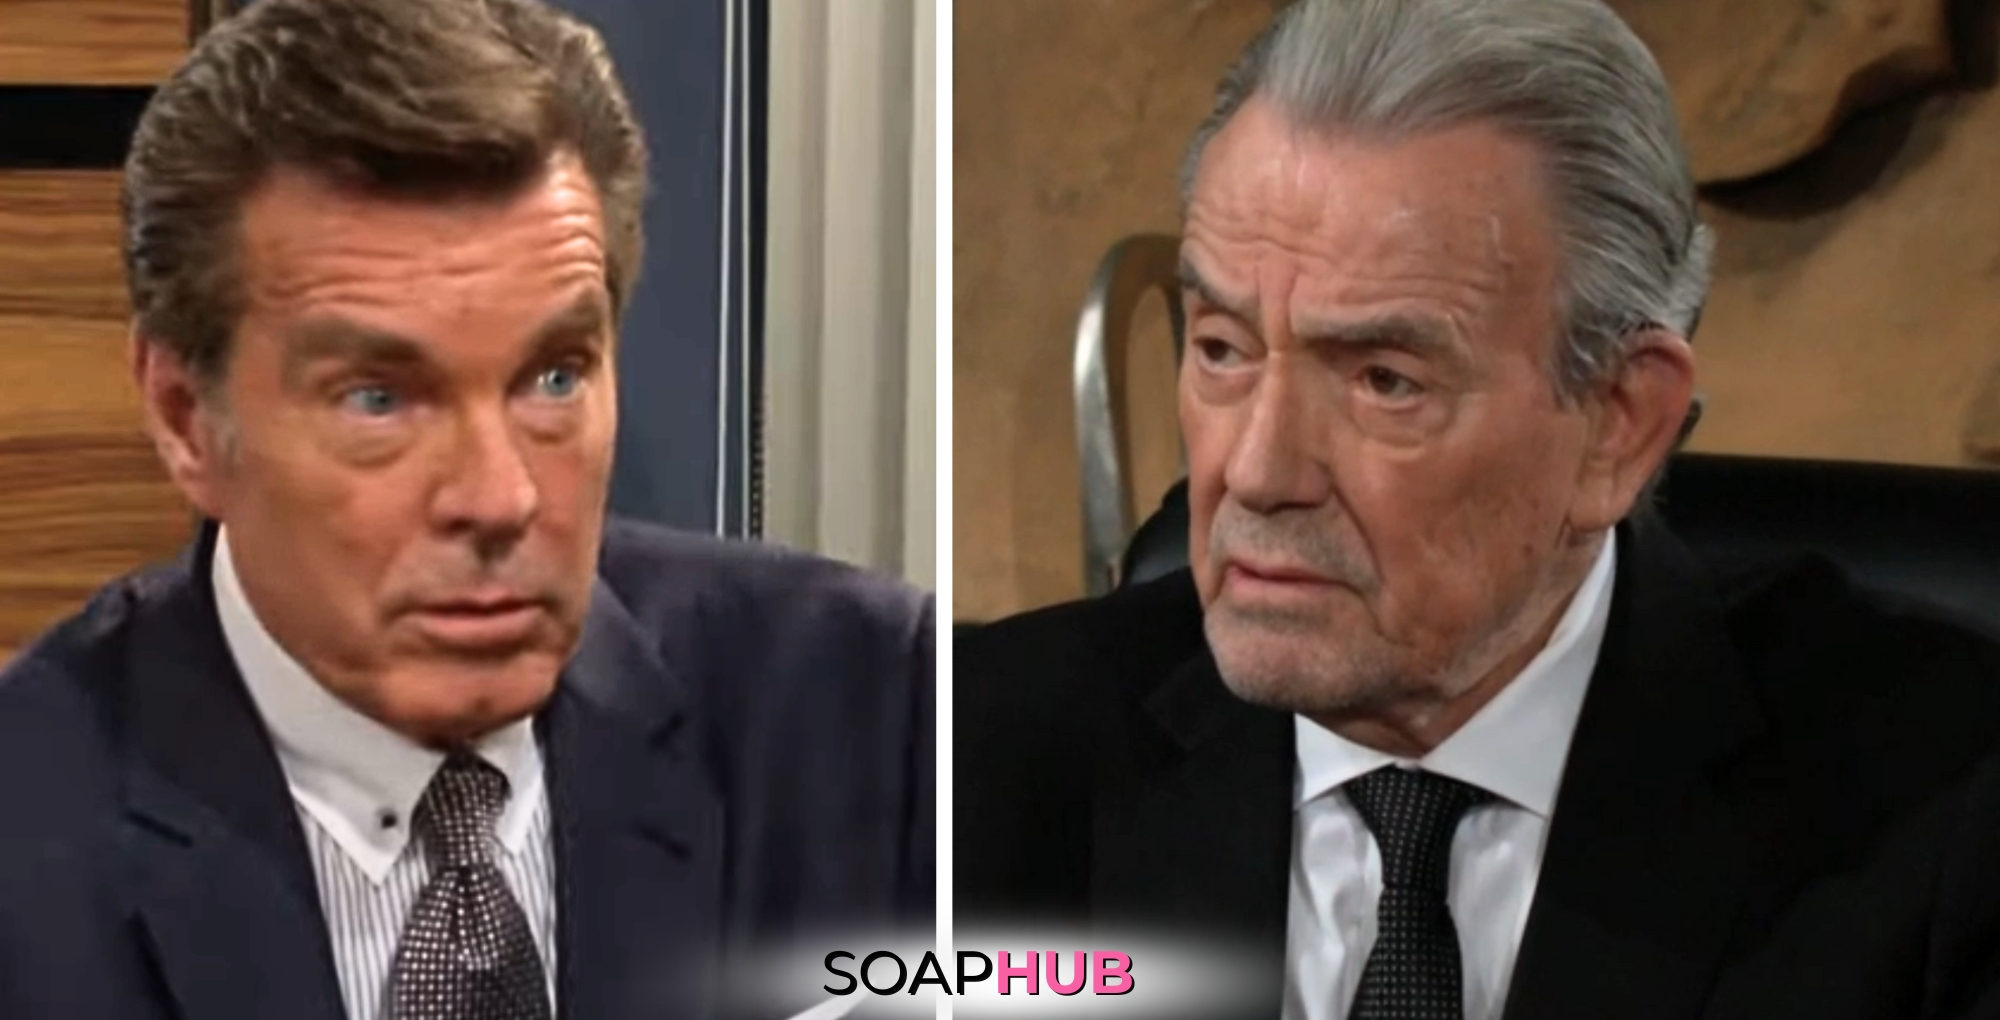 The Young and the Restless spoilers for June 12 feature Jack and Victor with the Soap Hub logo.